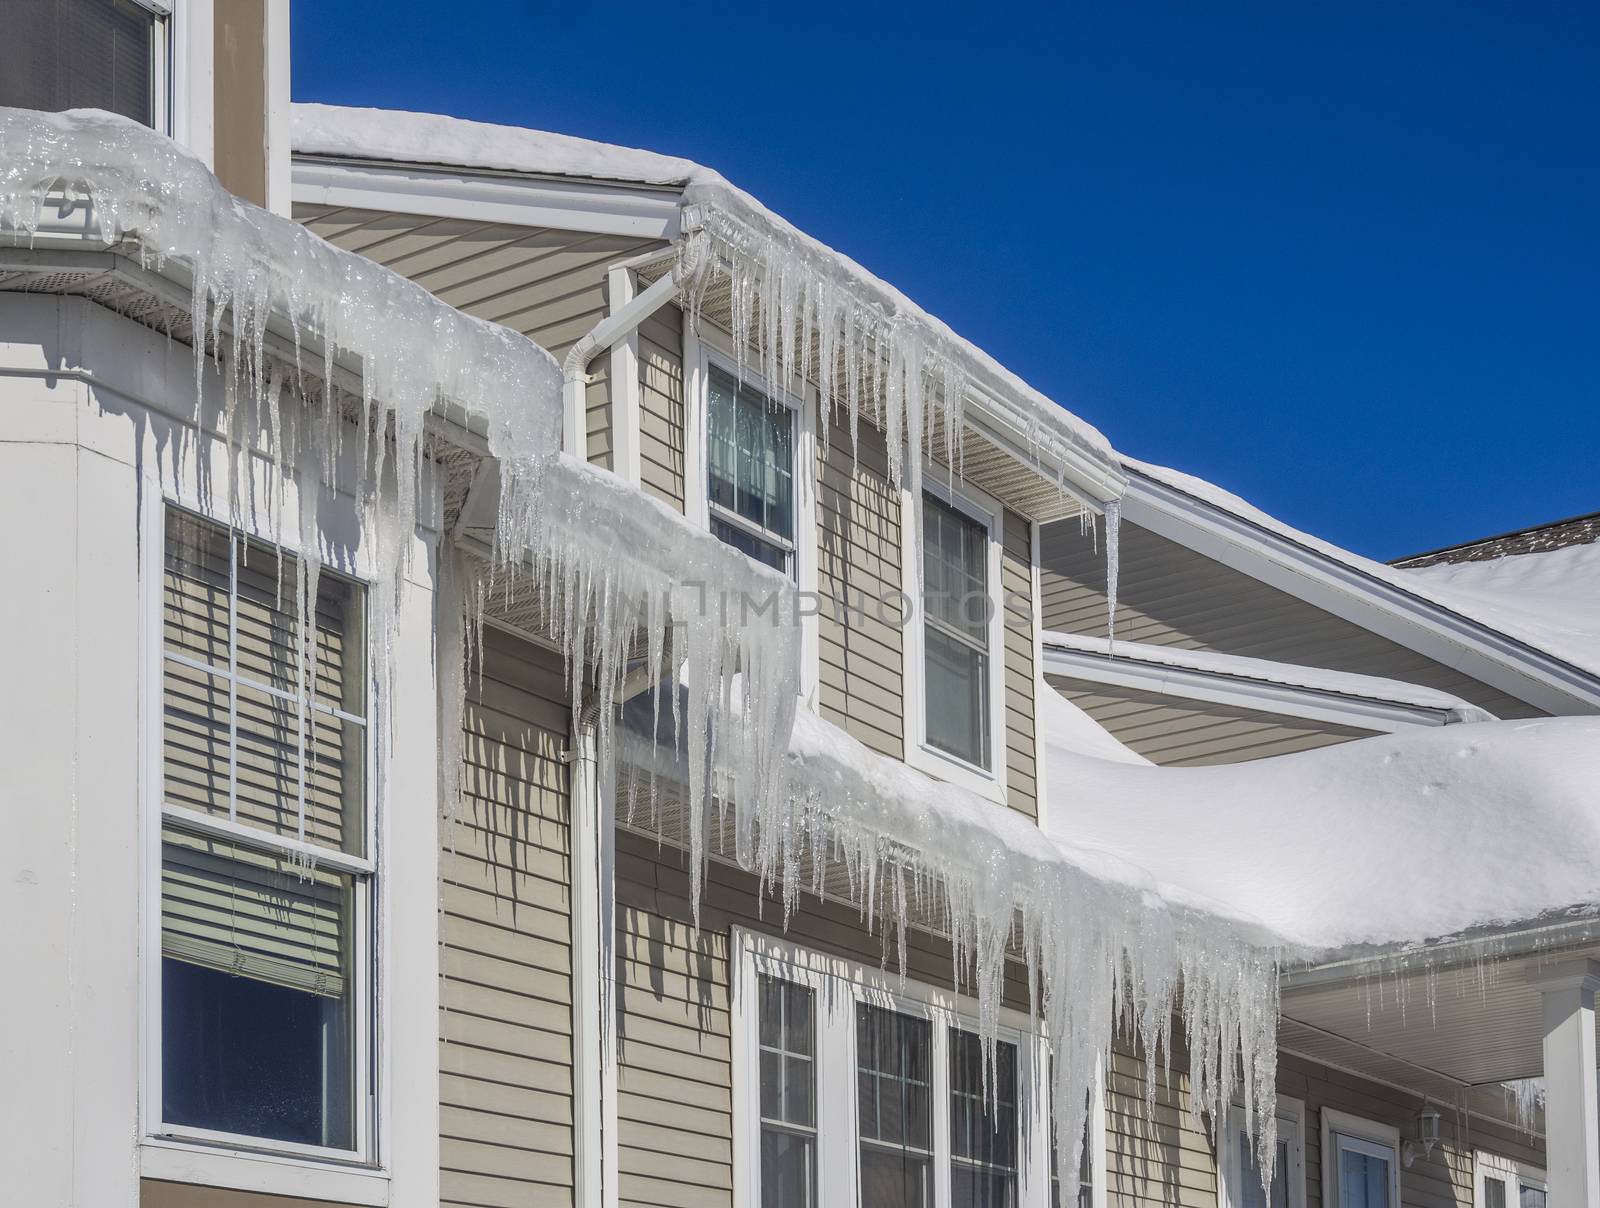 Ice dams and snow on roof and gutters by f/2sumicron